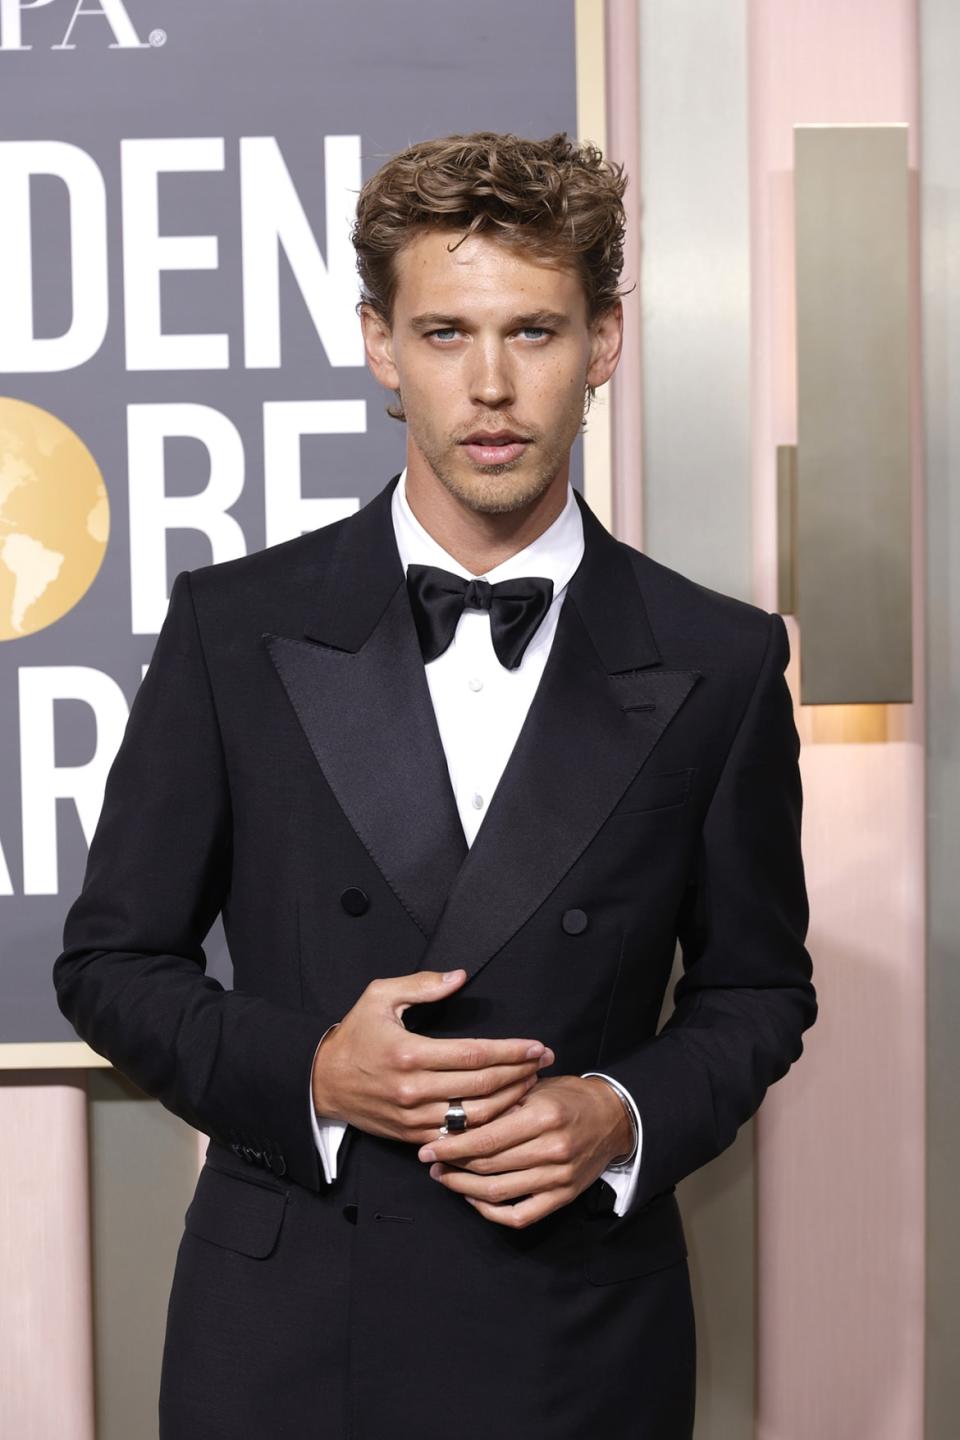 <div class="inline-image__caption"><p>Austin Butler attends the 80th Annual Golden Globe Awards at The Beverly Hilton on January 10, 2023 in Beverly Hills, California.</p></div> <div class="inline-image__credit">Frazer Harrison/WireImage</div>